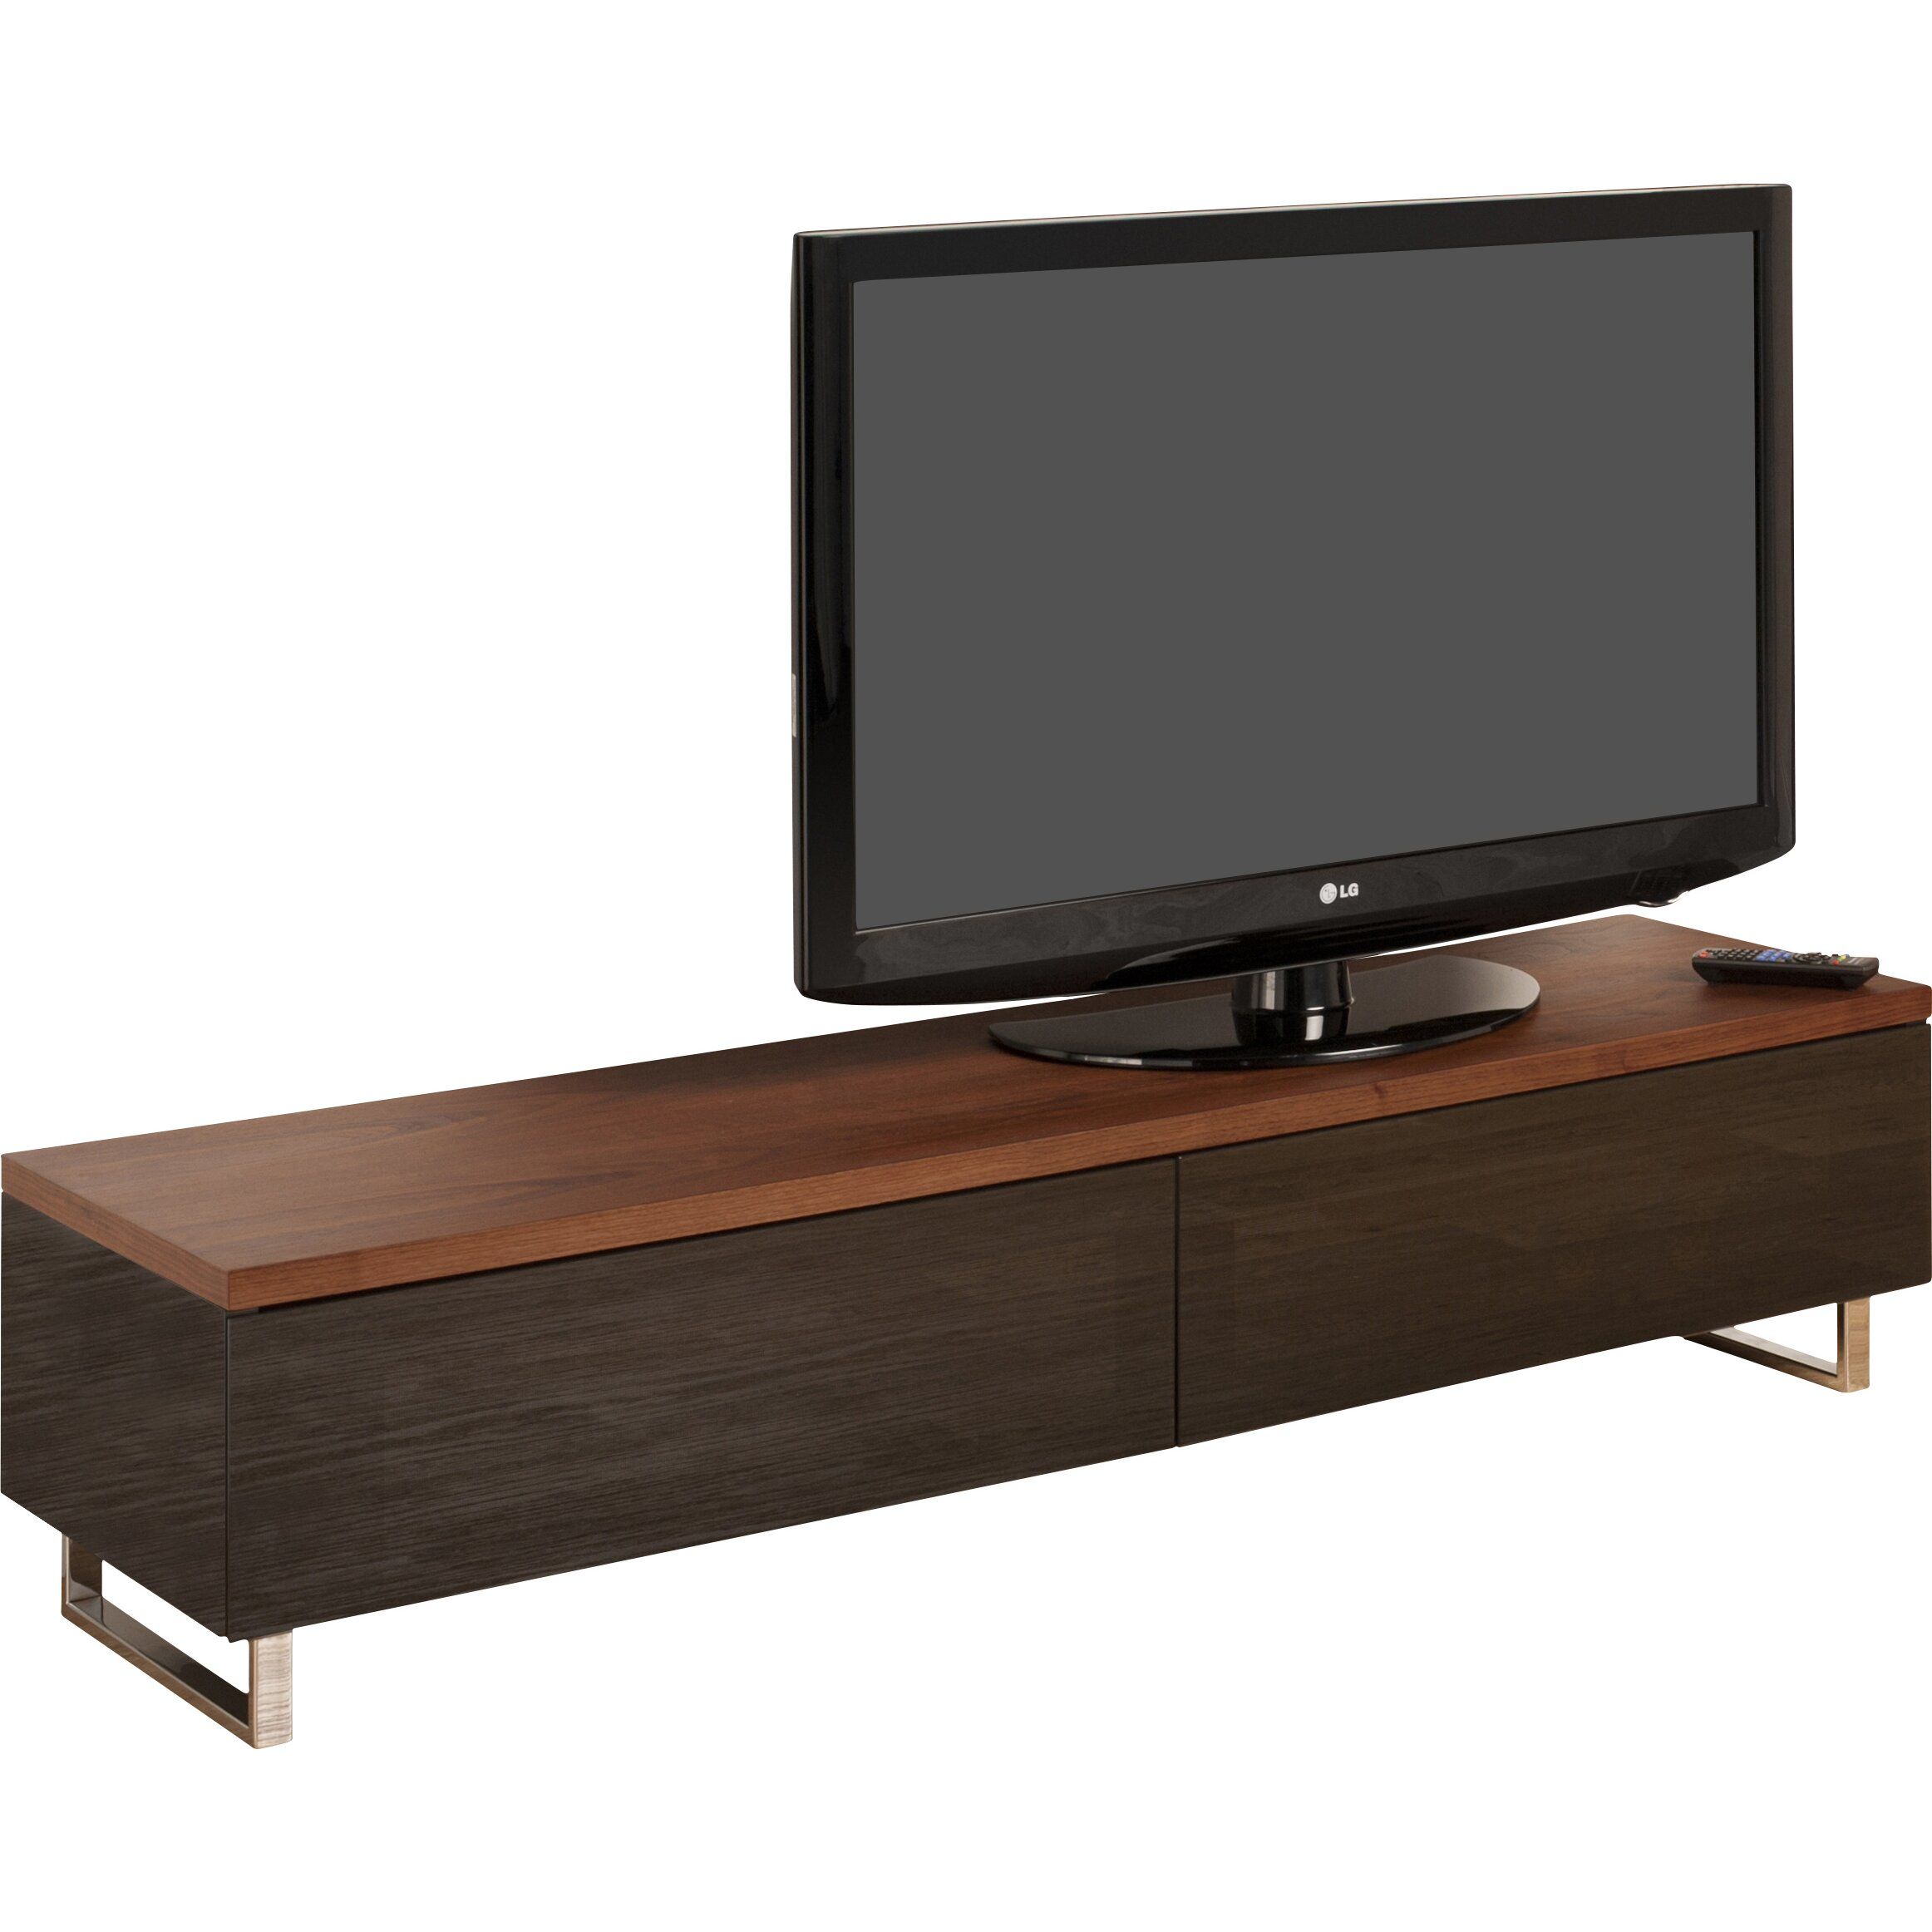 Techlink Panorama Tv Stand For Tvs Up To 61" & Reviews Throughout Techlink Arena Tv Stands (View 6 of 15)